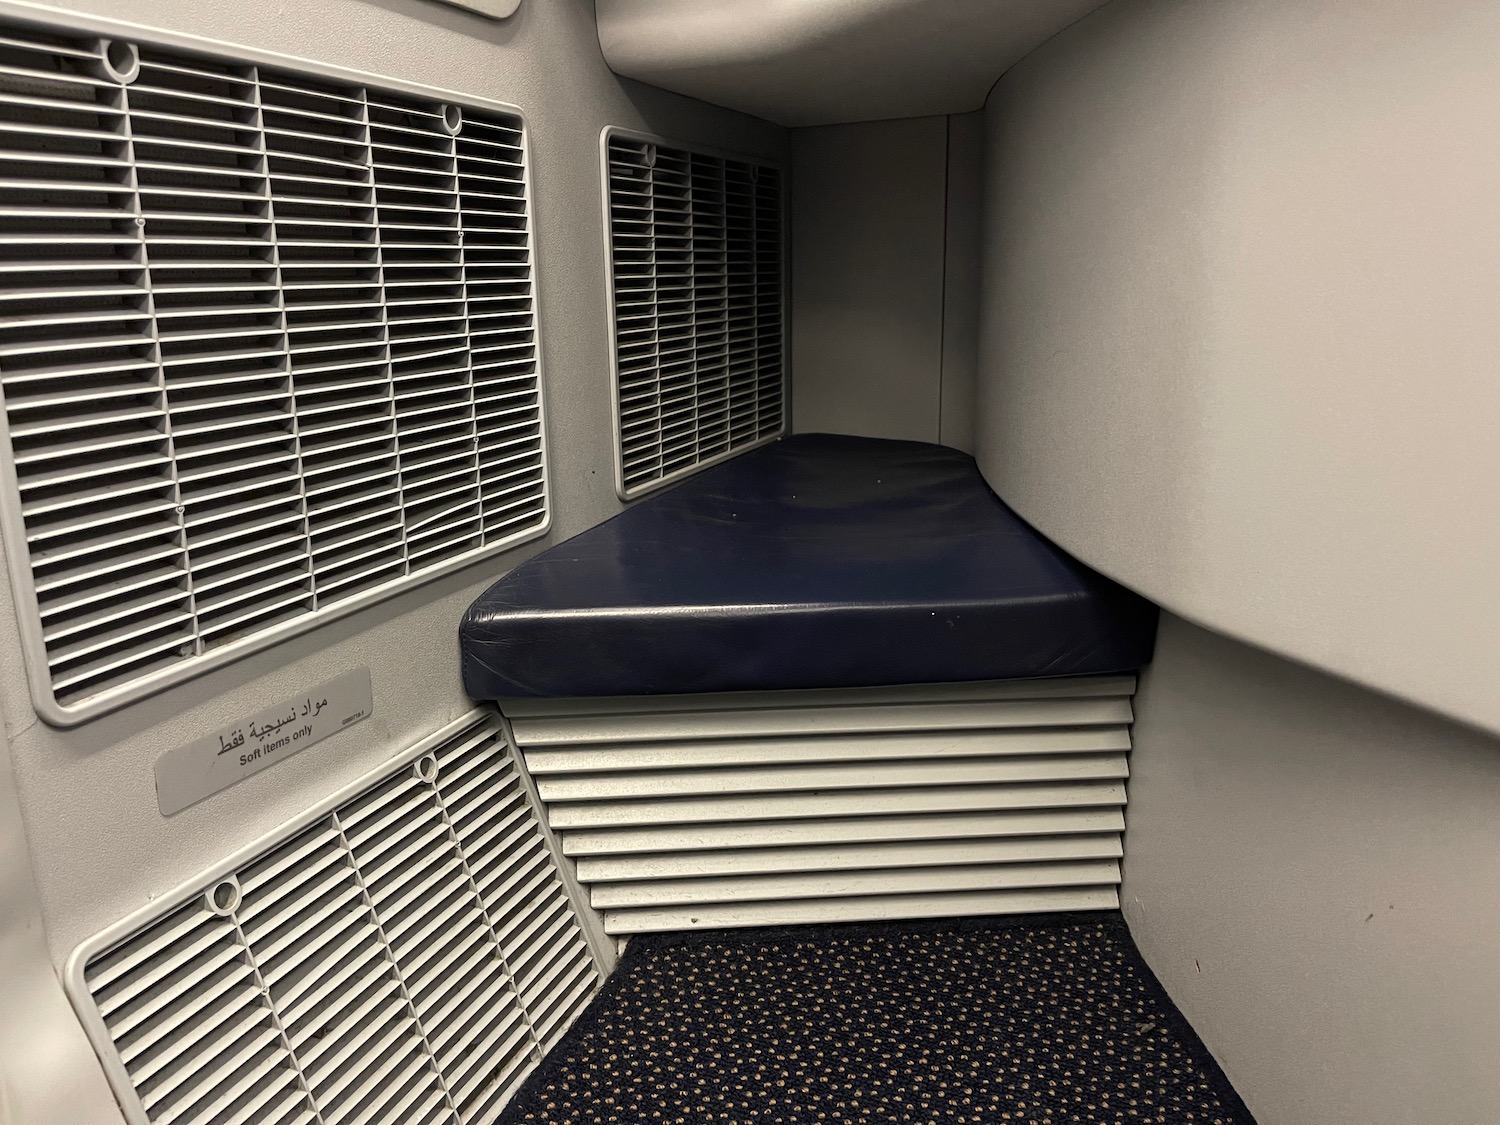 a seat in a room with vent